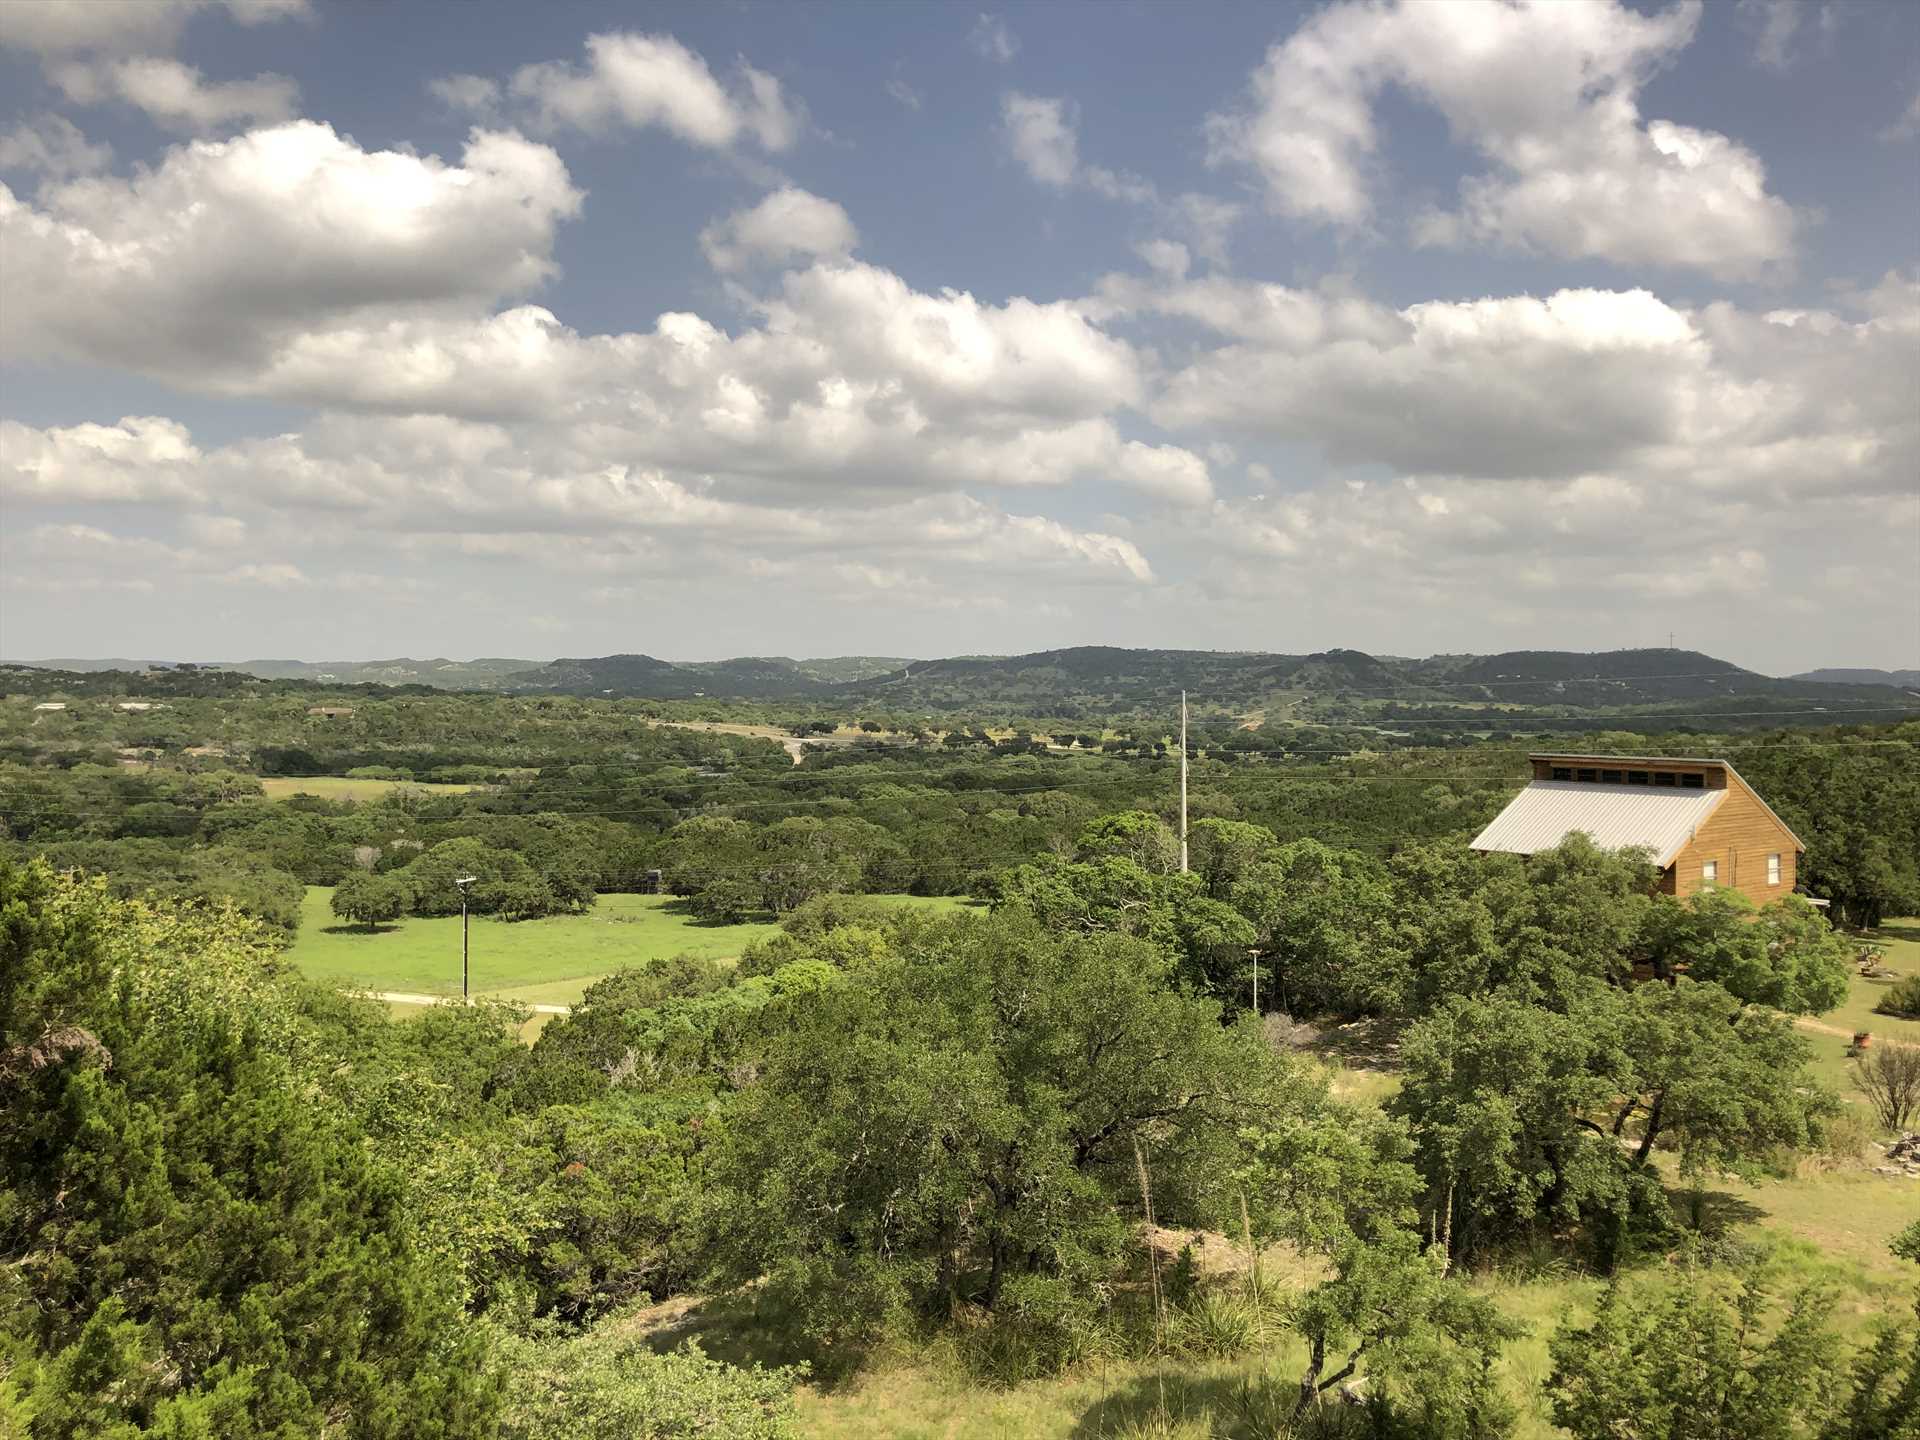                                                 The Rockin' B Ranch's high perch in the Hill Country gives you stunning views of the countryside in every direction!